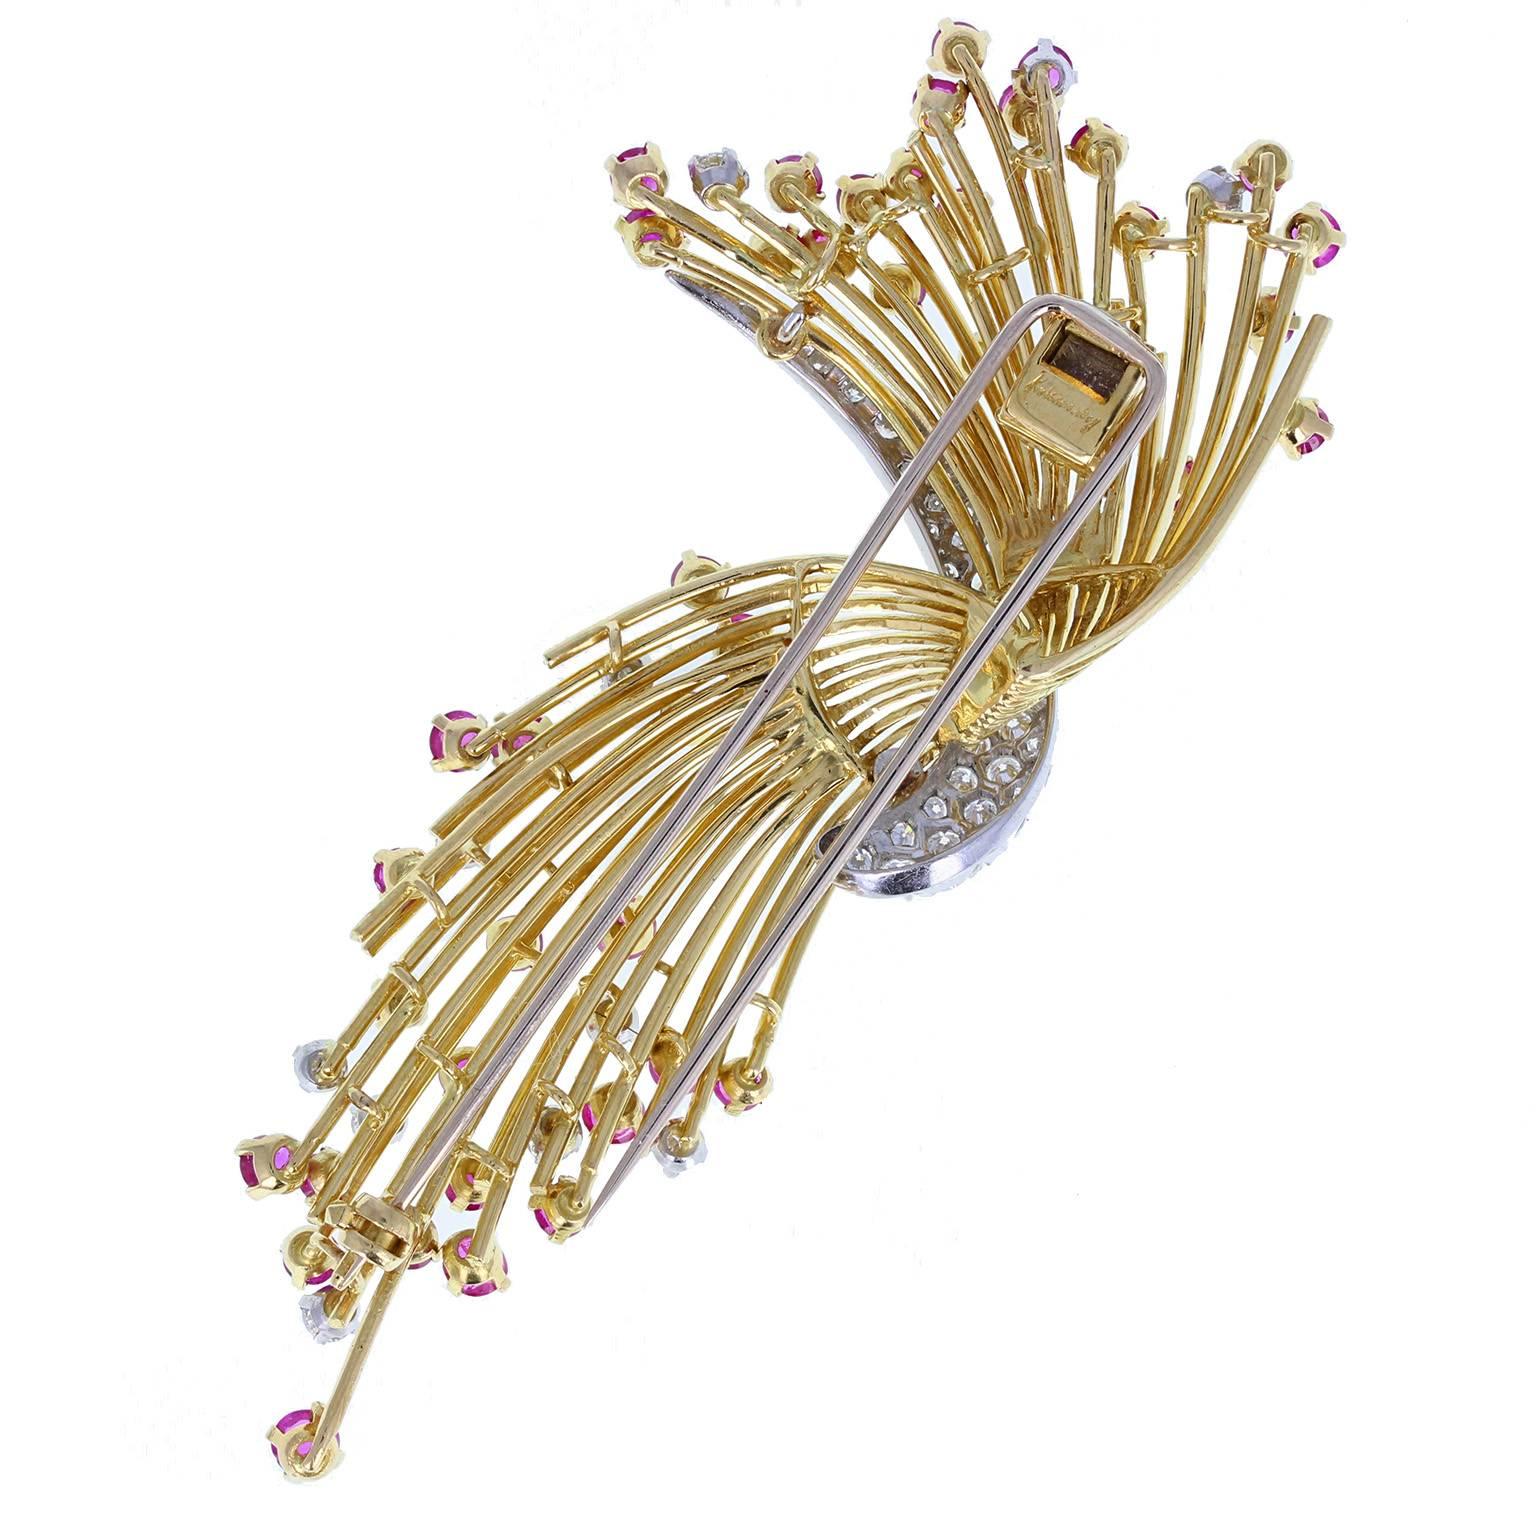 Unmistakably Kutchinsky in style, this vintage brooch features a spray of gold wires, set with blood red rubies and diamonds, emanating from a central pave-set diamond section. Signed Kutchinsky.
 
Setting
Tests as 18 carat gold
 
Ruby
Weight: